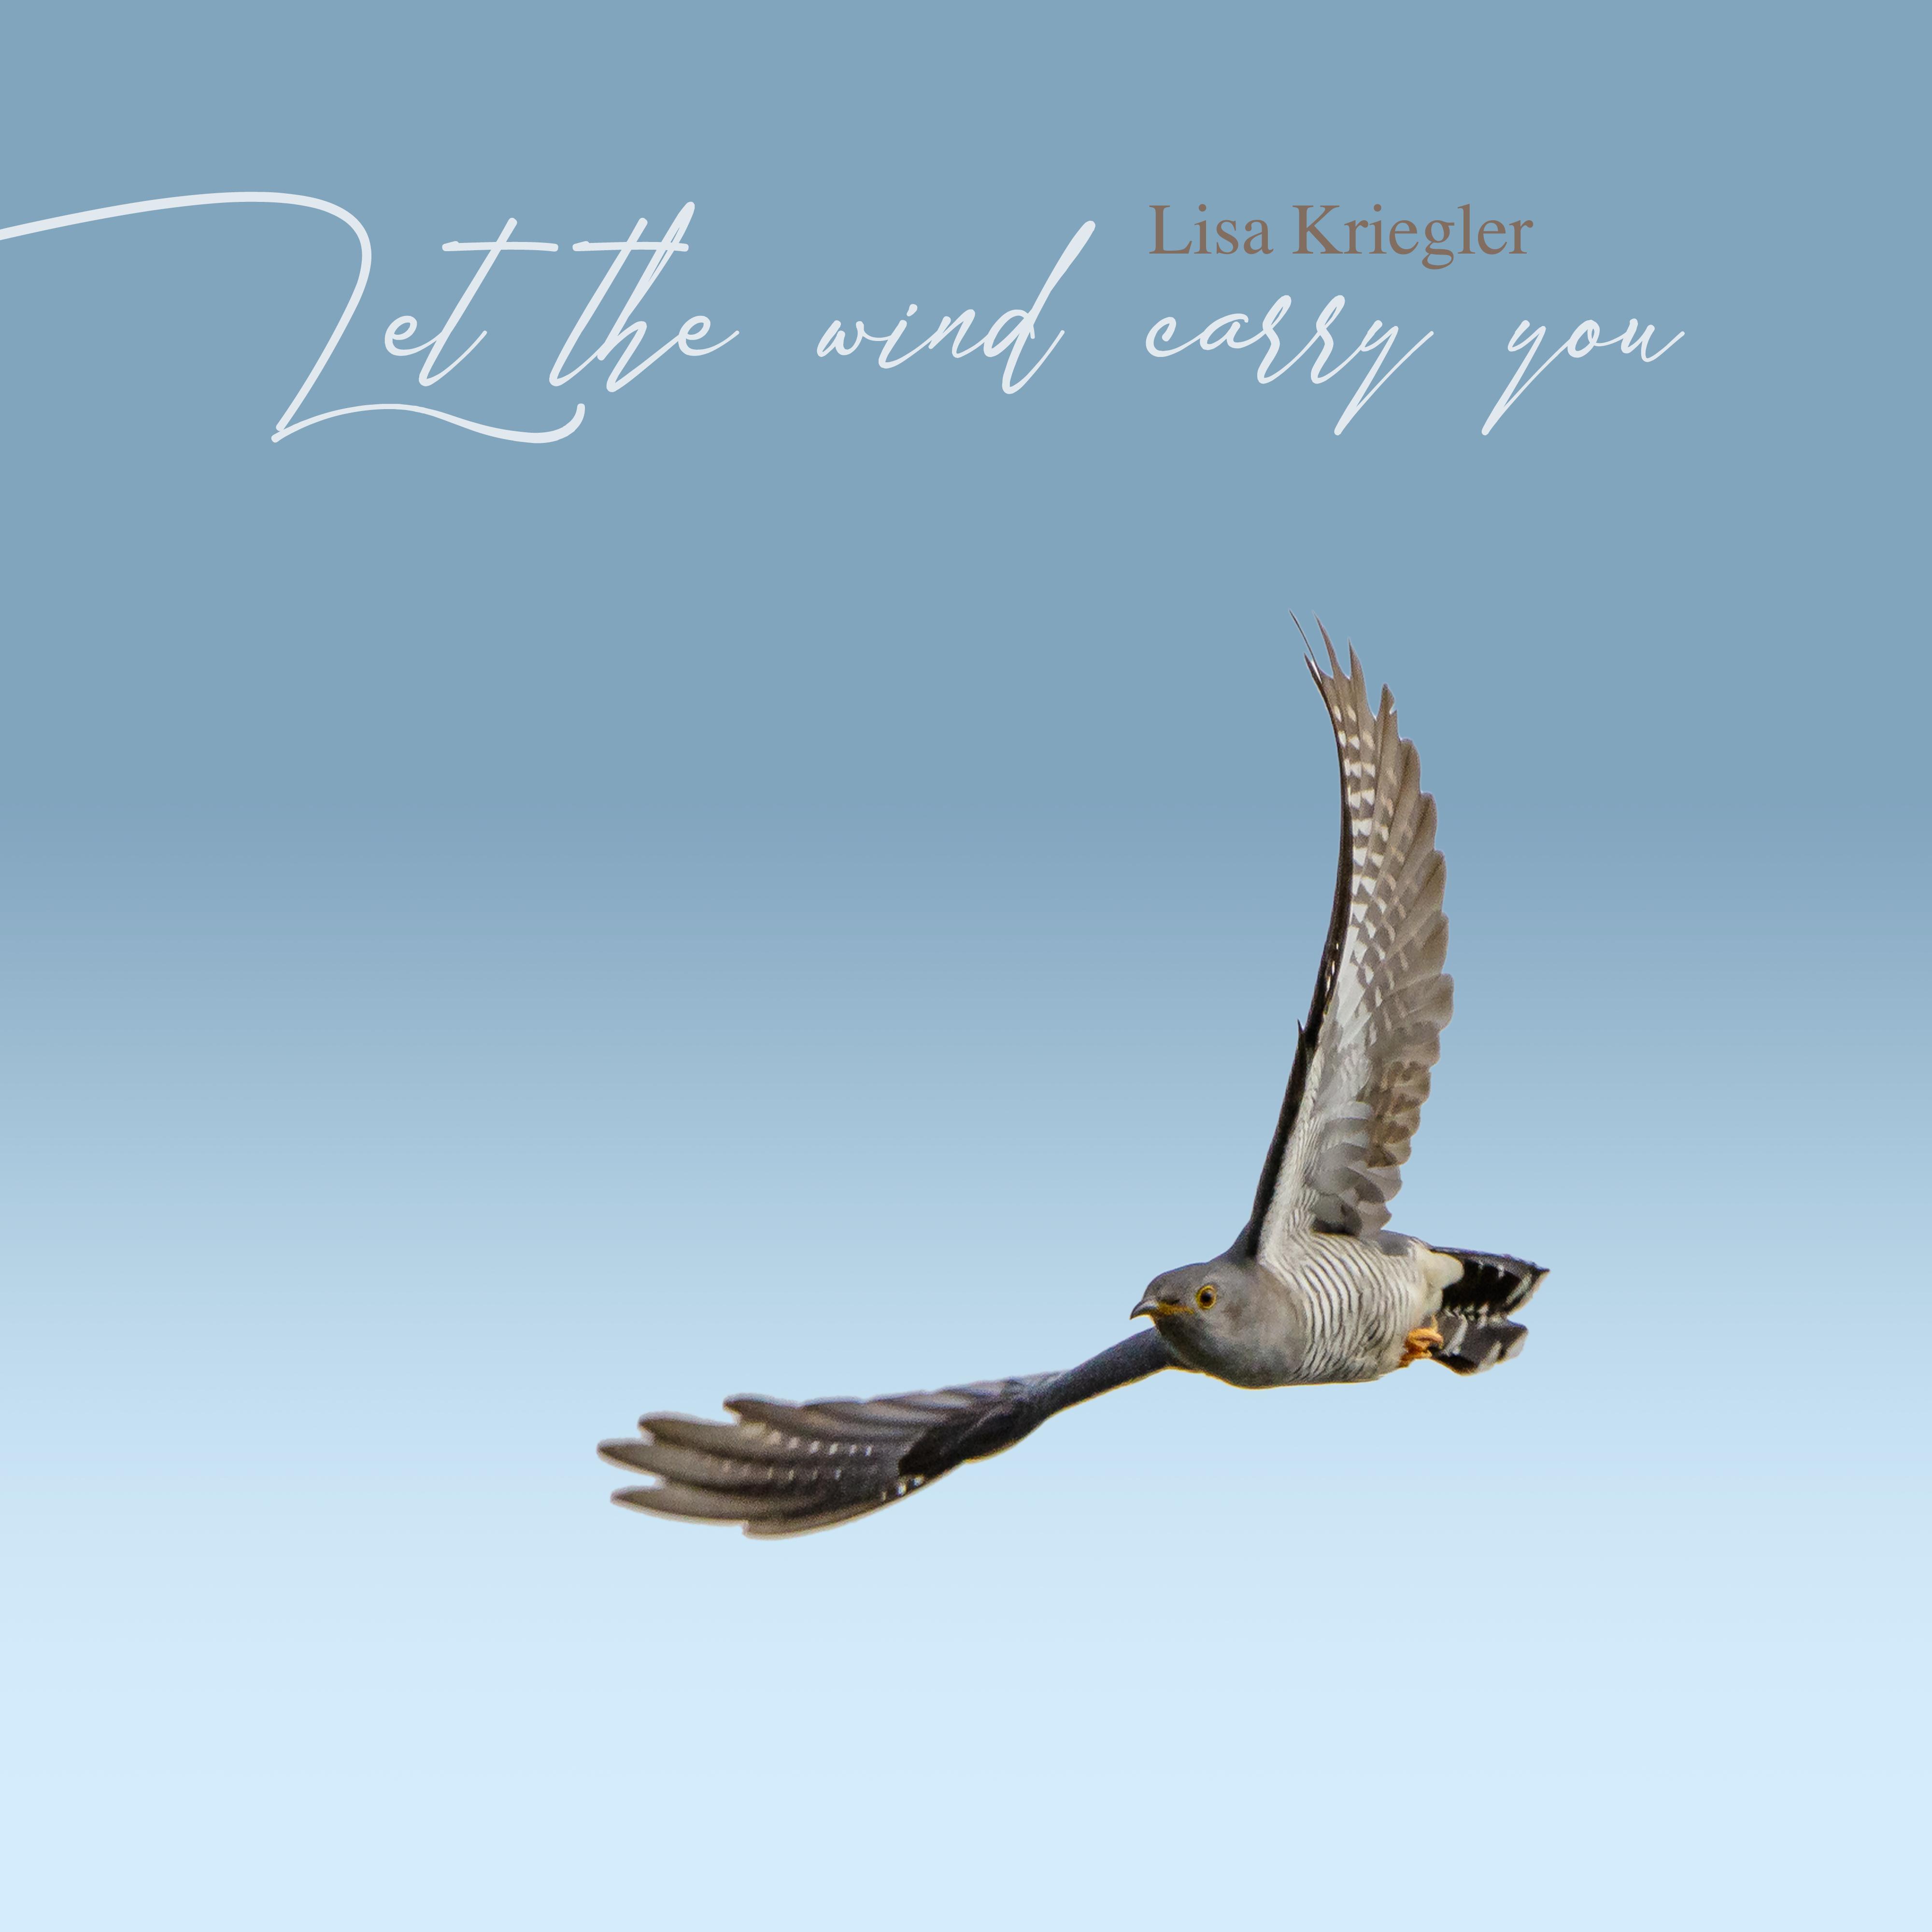 Lisa Kriegler - Let the wind carry you